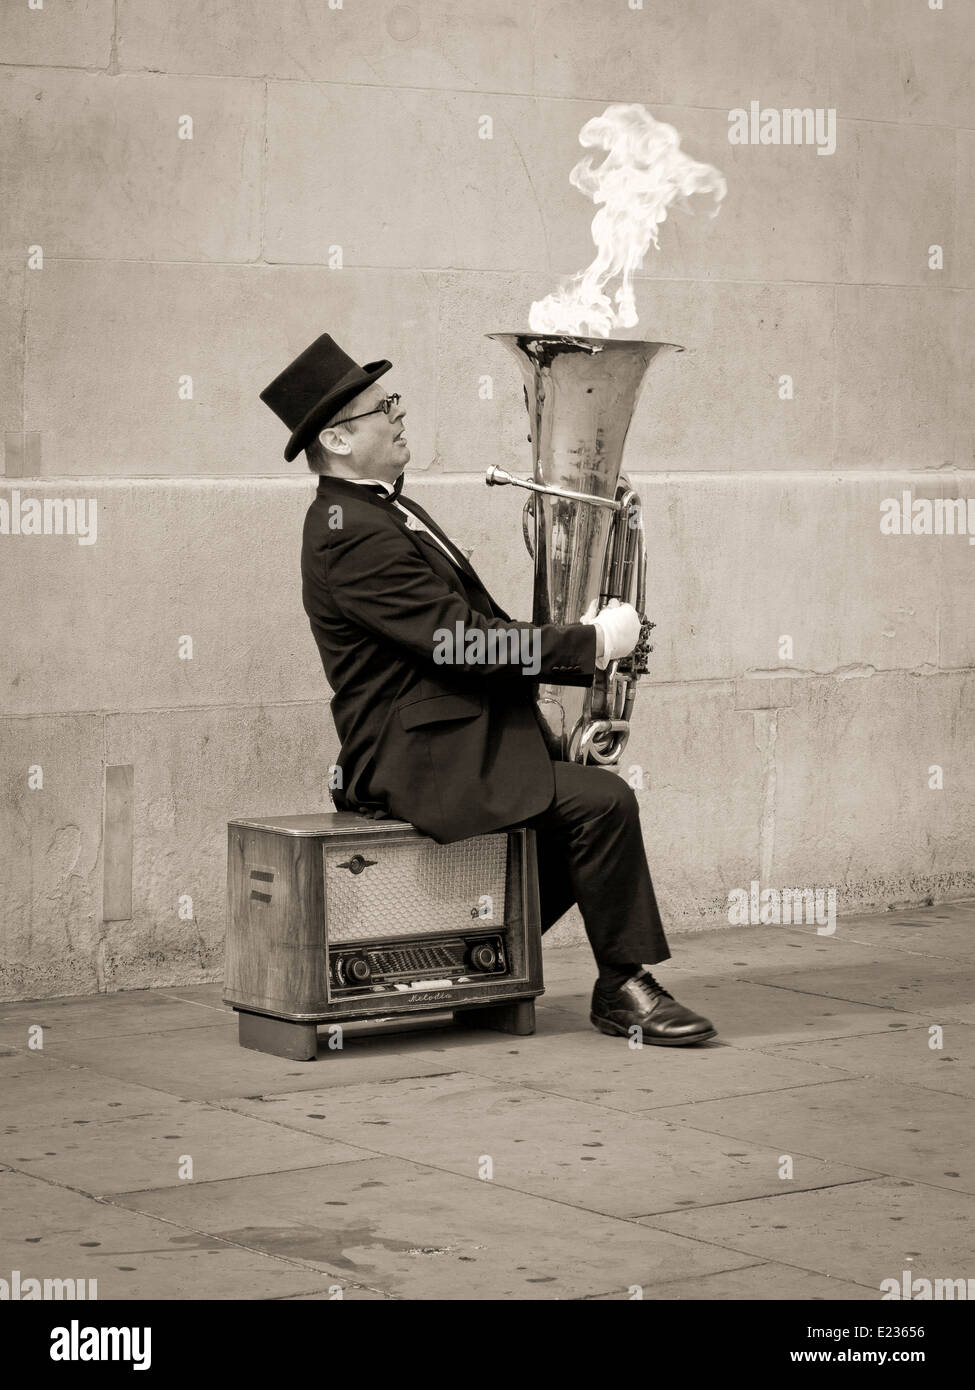 Busker, Christopher Werkowicz playing flaming tuba sitting on an old radio against a plain stone wall in sepia Stock Photo